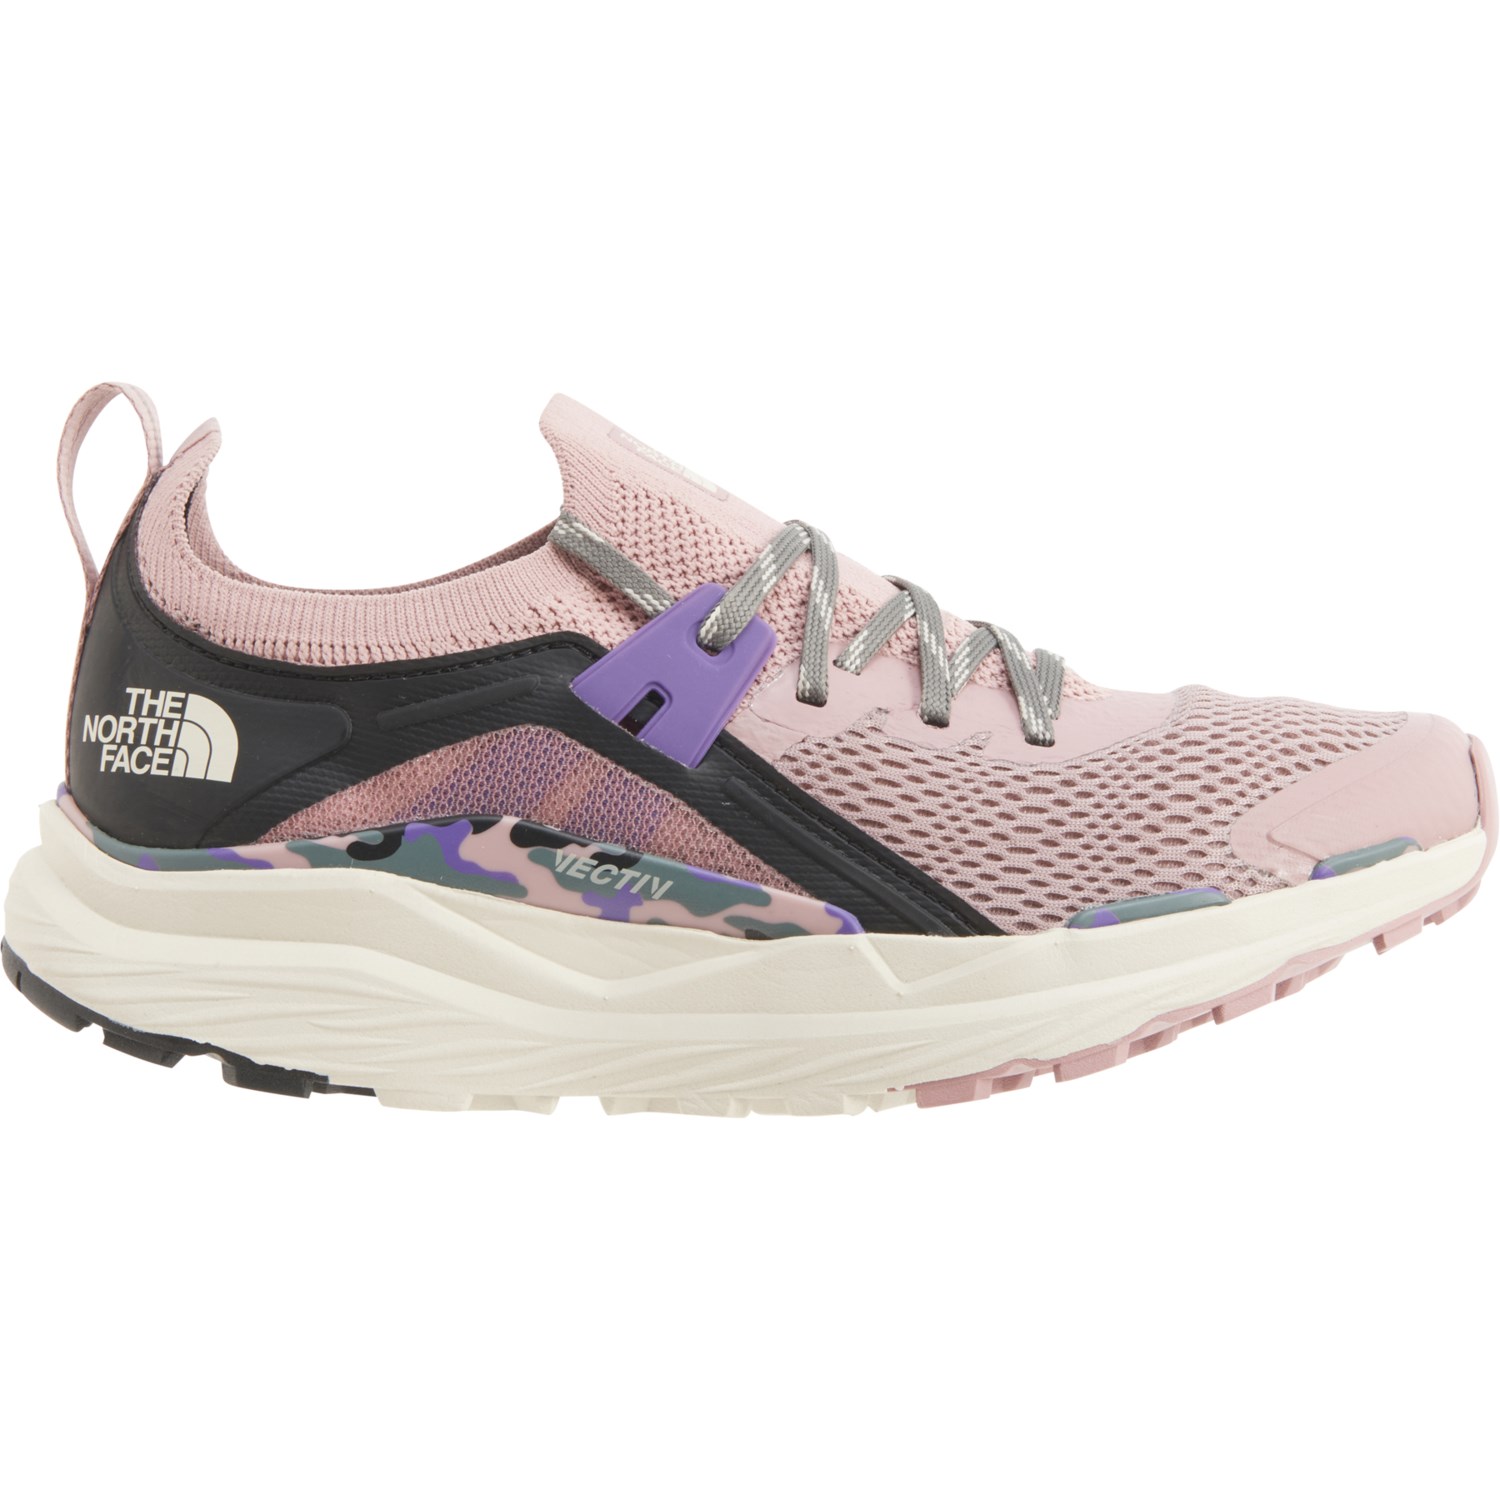 The North Face VECTIV Hypnum Trail Running Shoes (For Women)